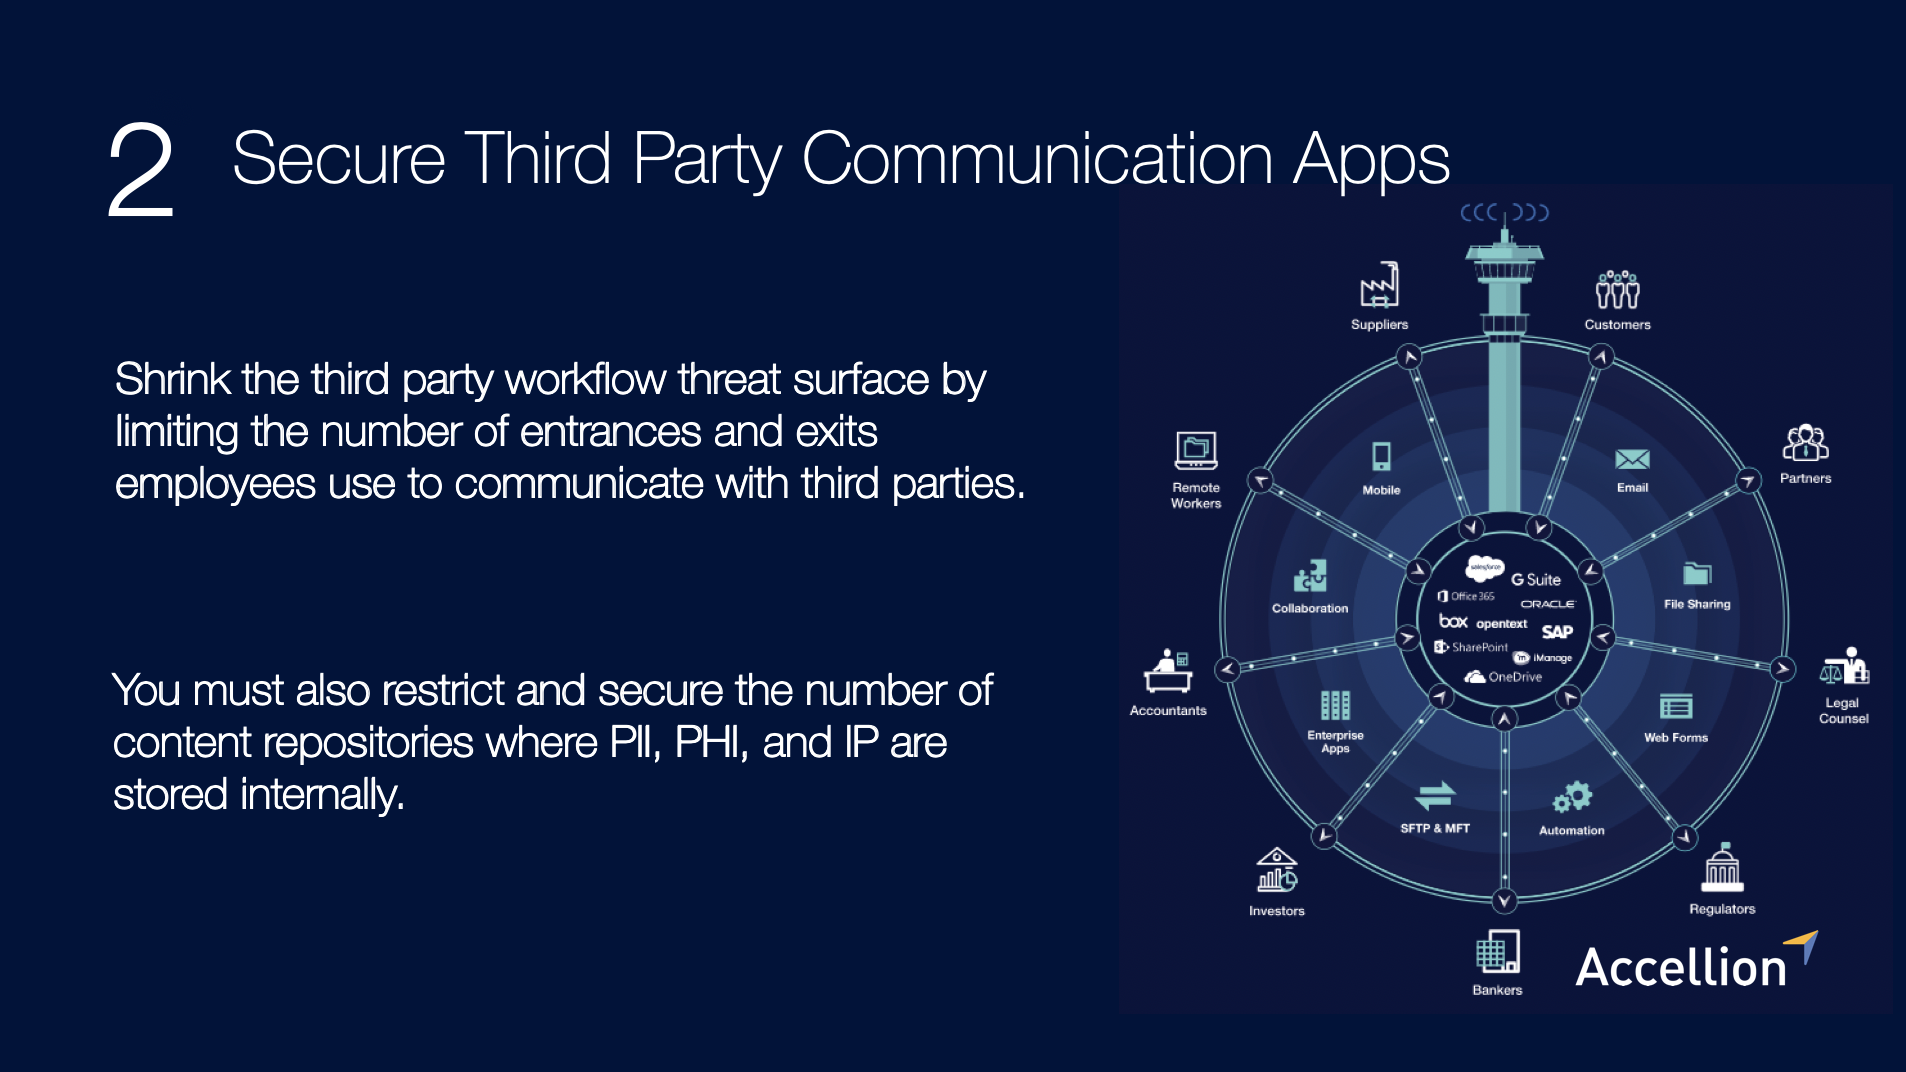 Secure Third Party Communication Apps